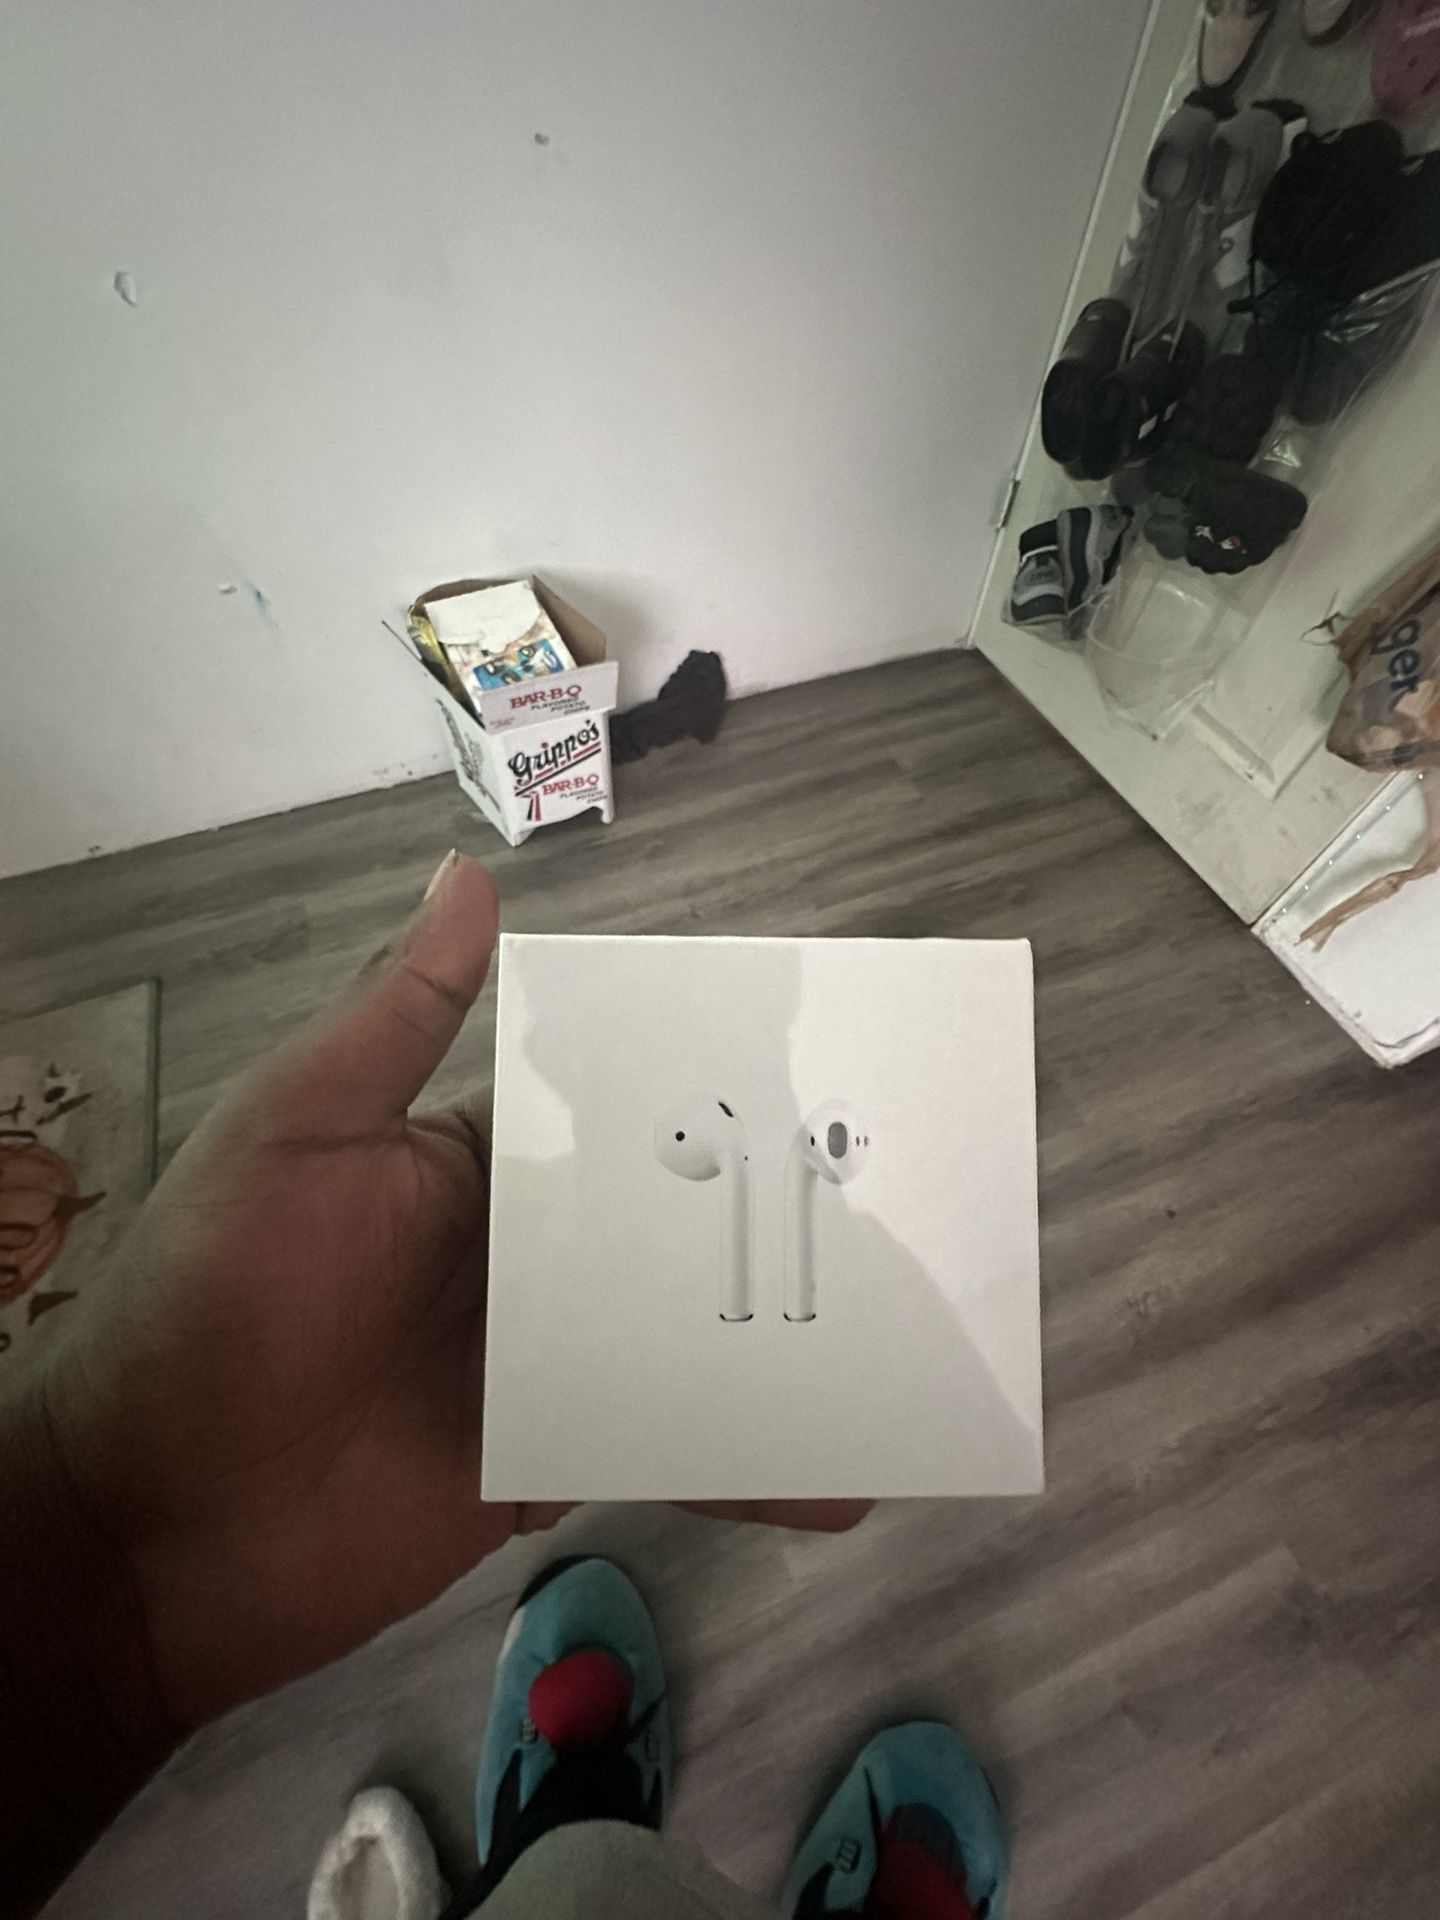 Apple AirPods (Never Used)